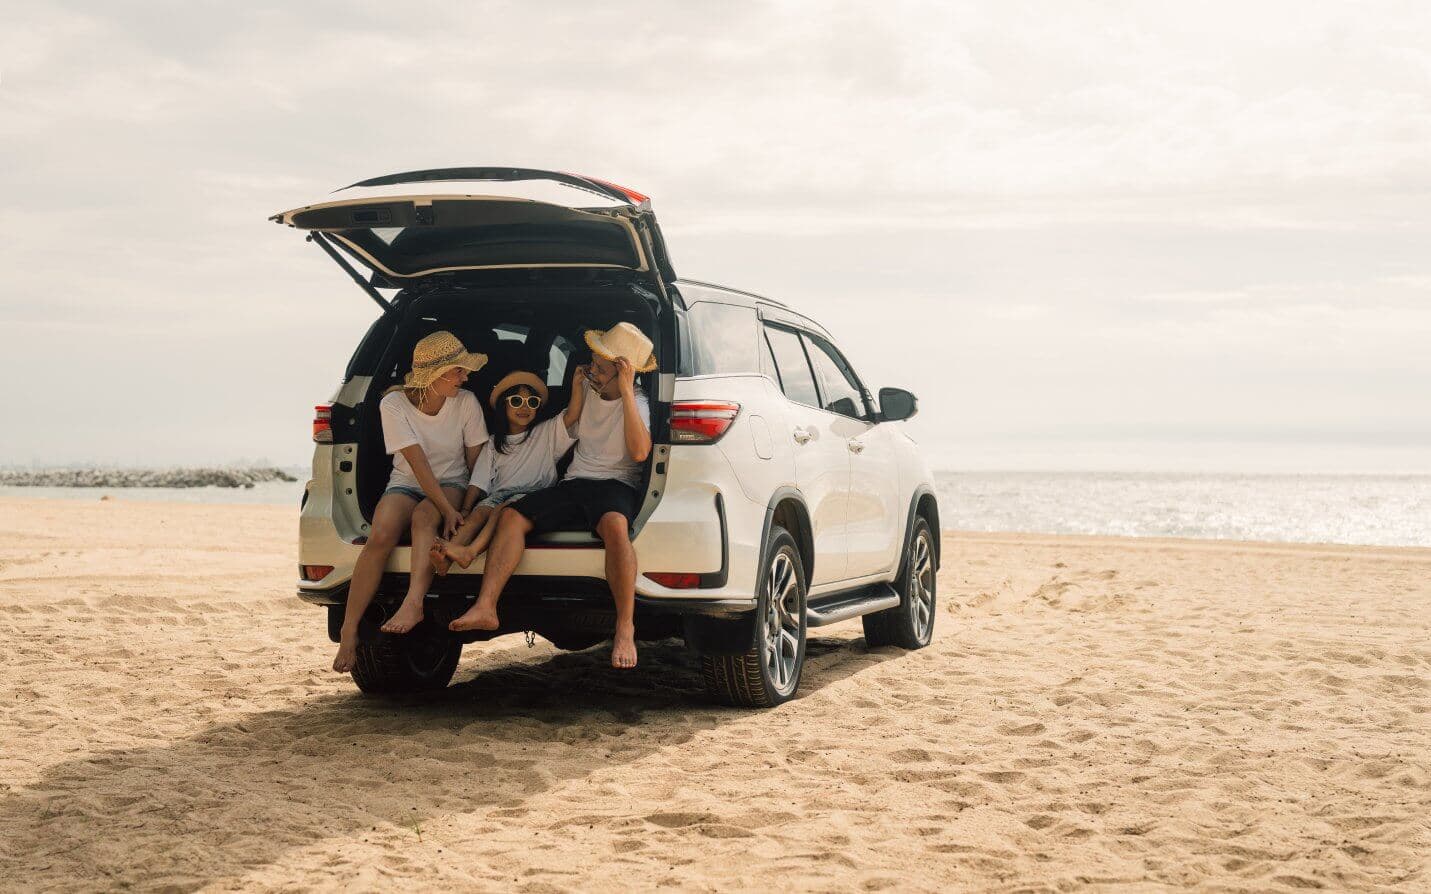 A family at the beach sitting together in the back of their vehicle